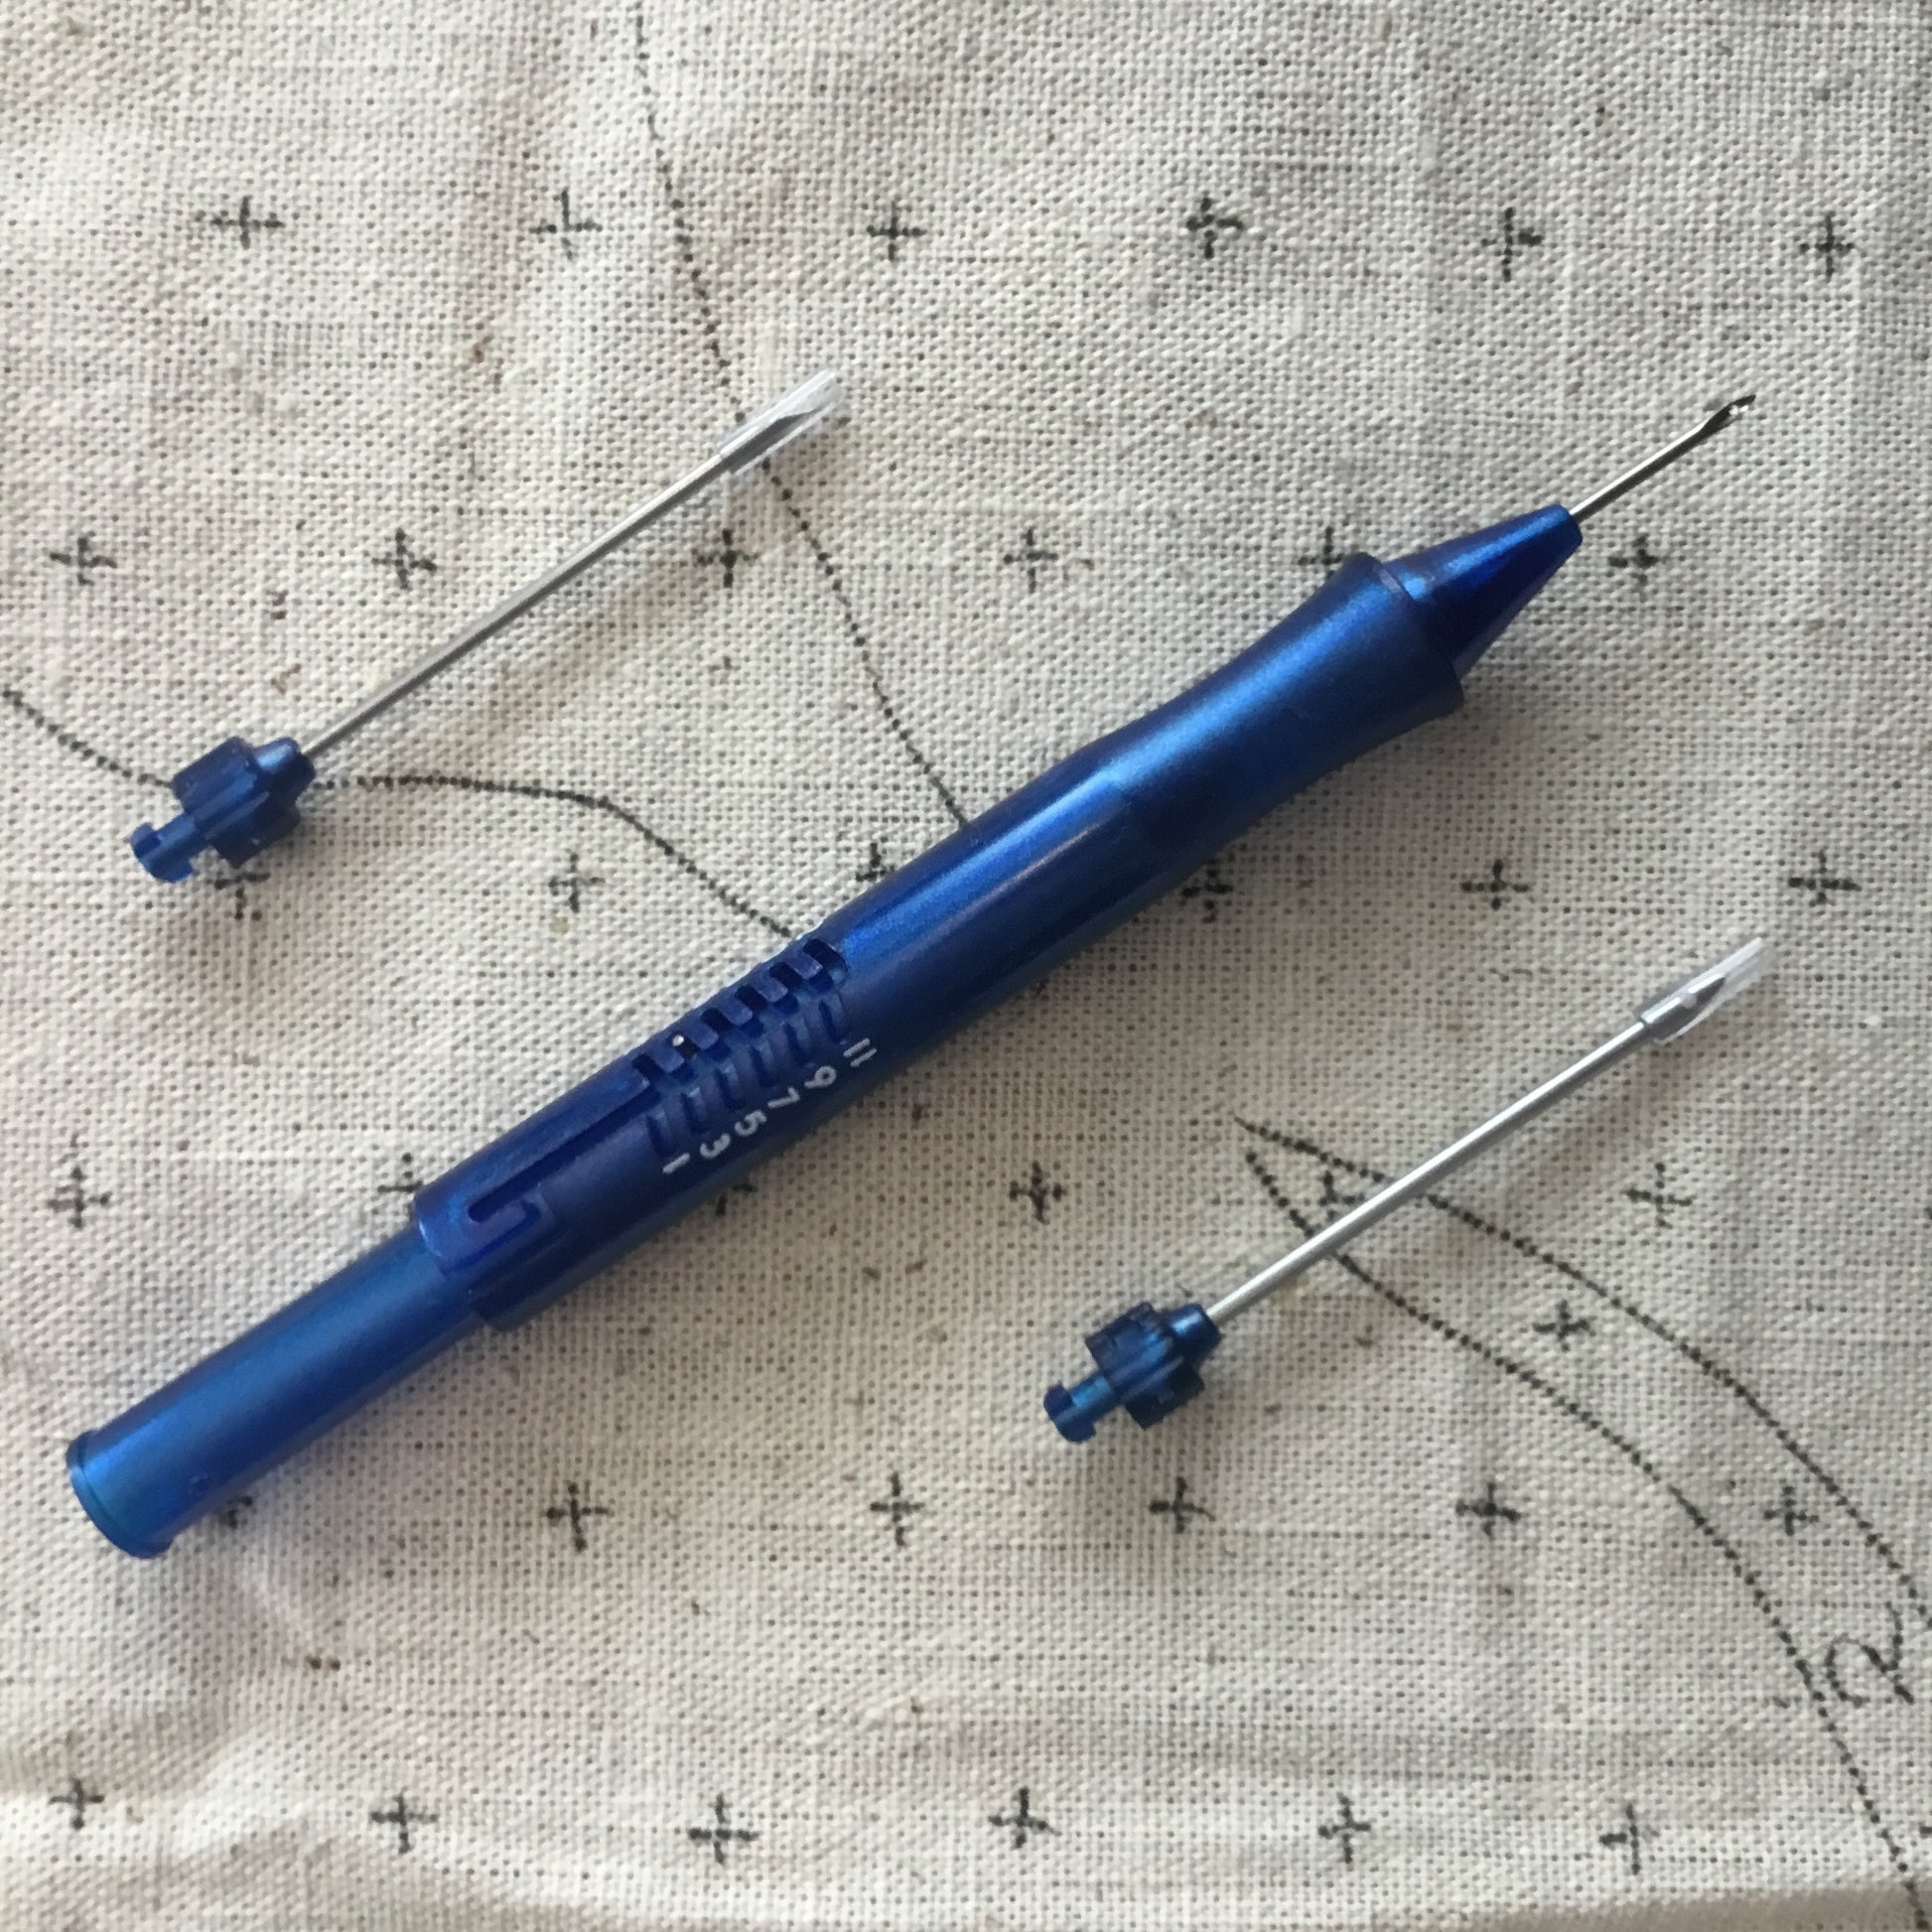 Ultra Punch Needle Tool